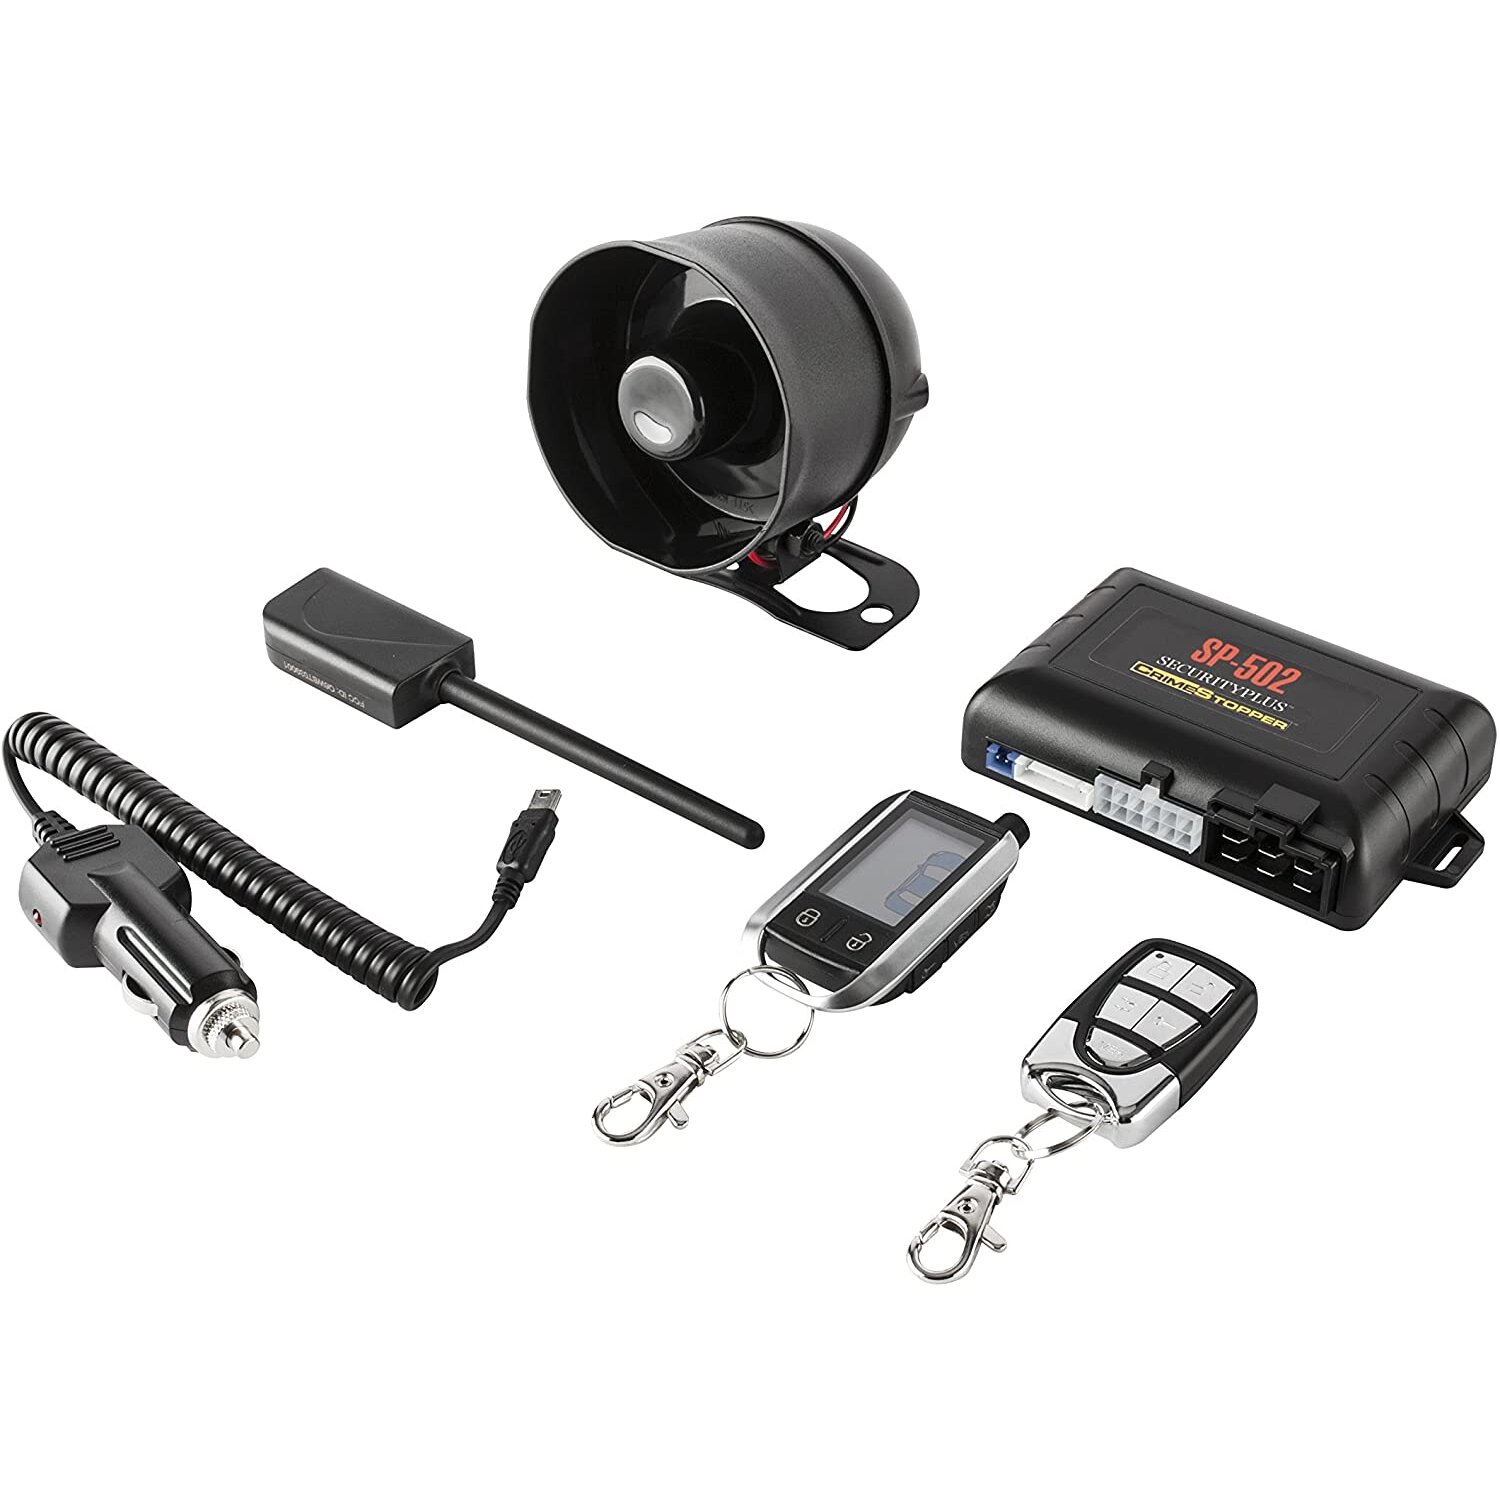 Crimestopper SP-502 2-Way LCD Paging Combo Alarm, Keyless Entry and Remote Start System with Rechargeable Remote Standard Packaging